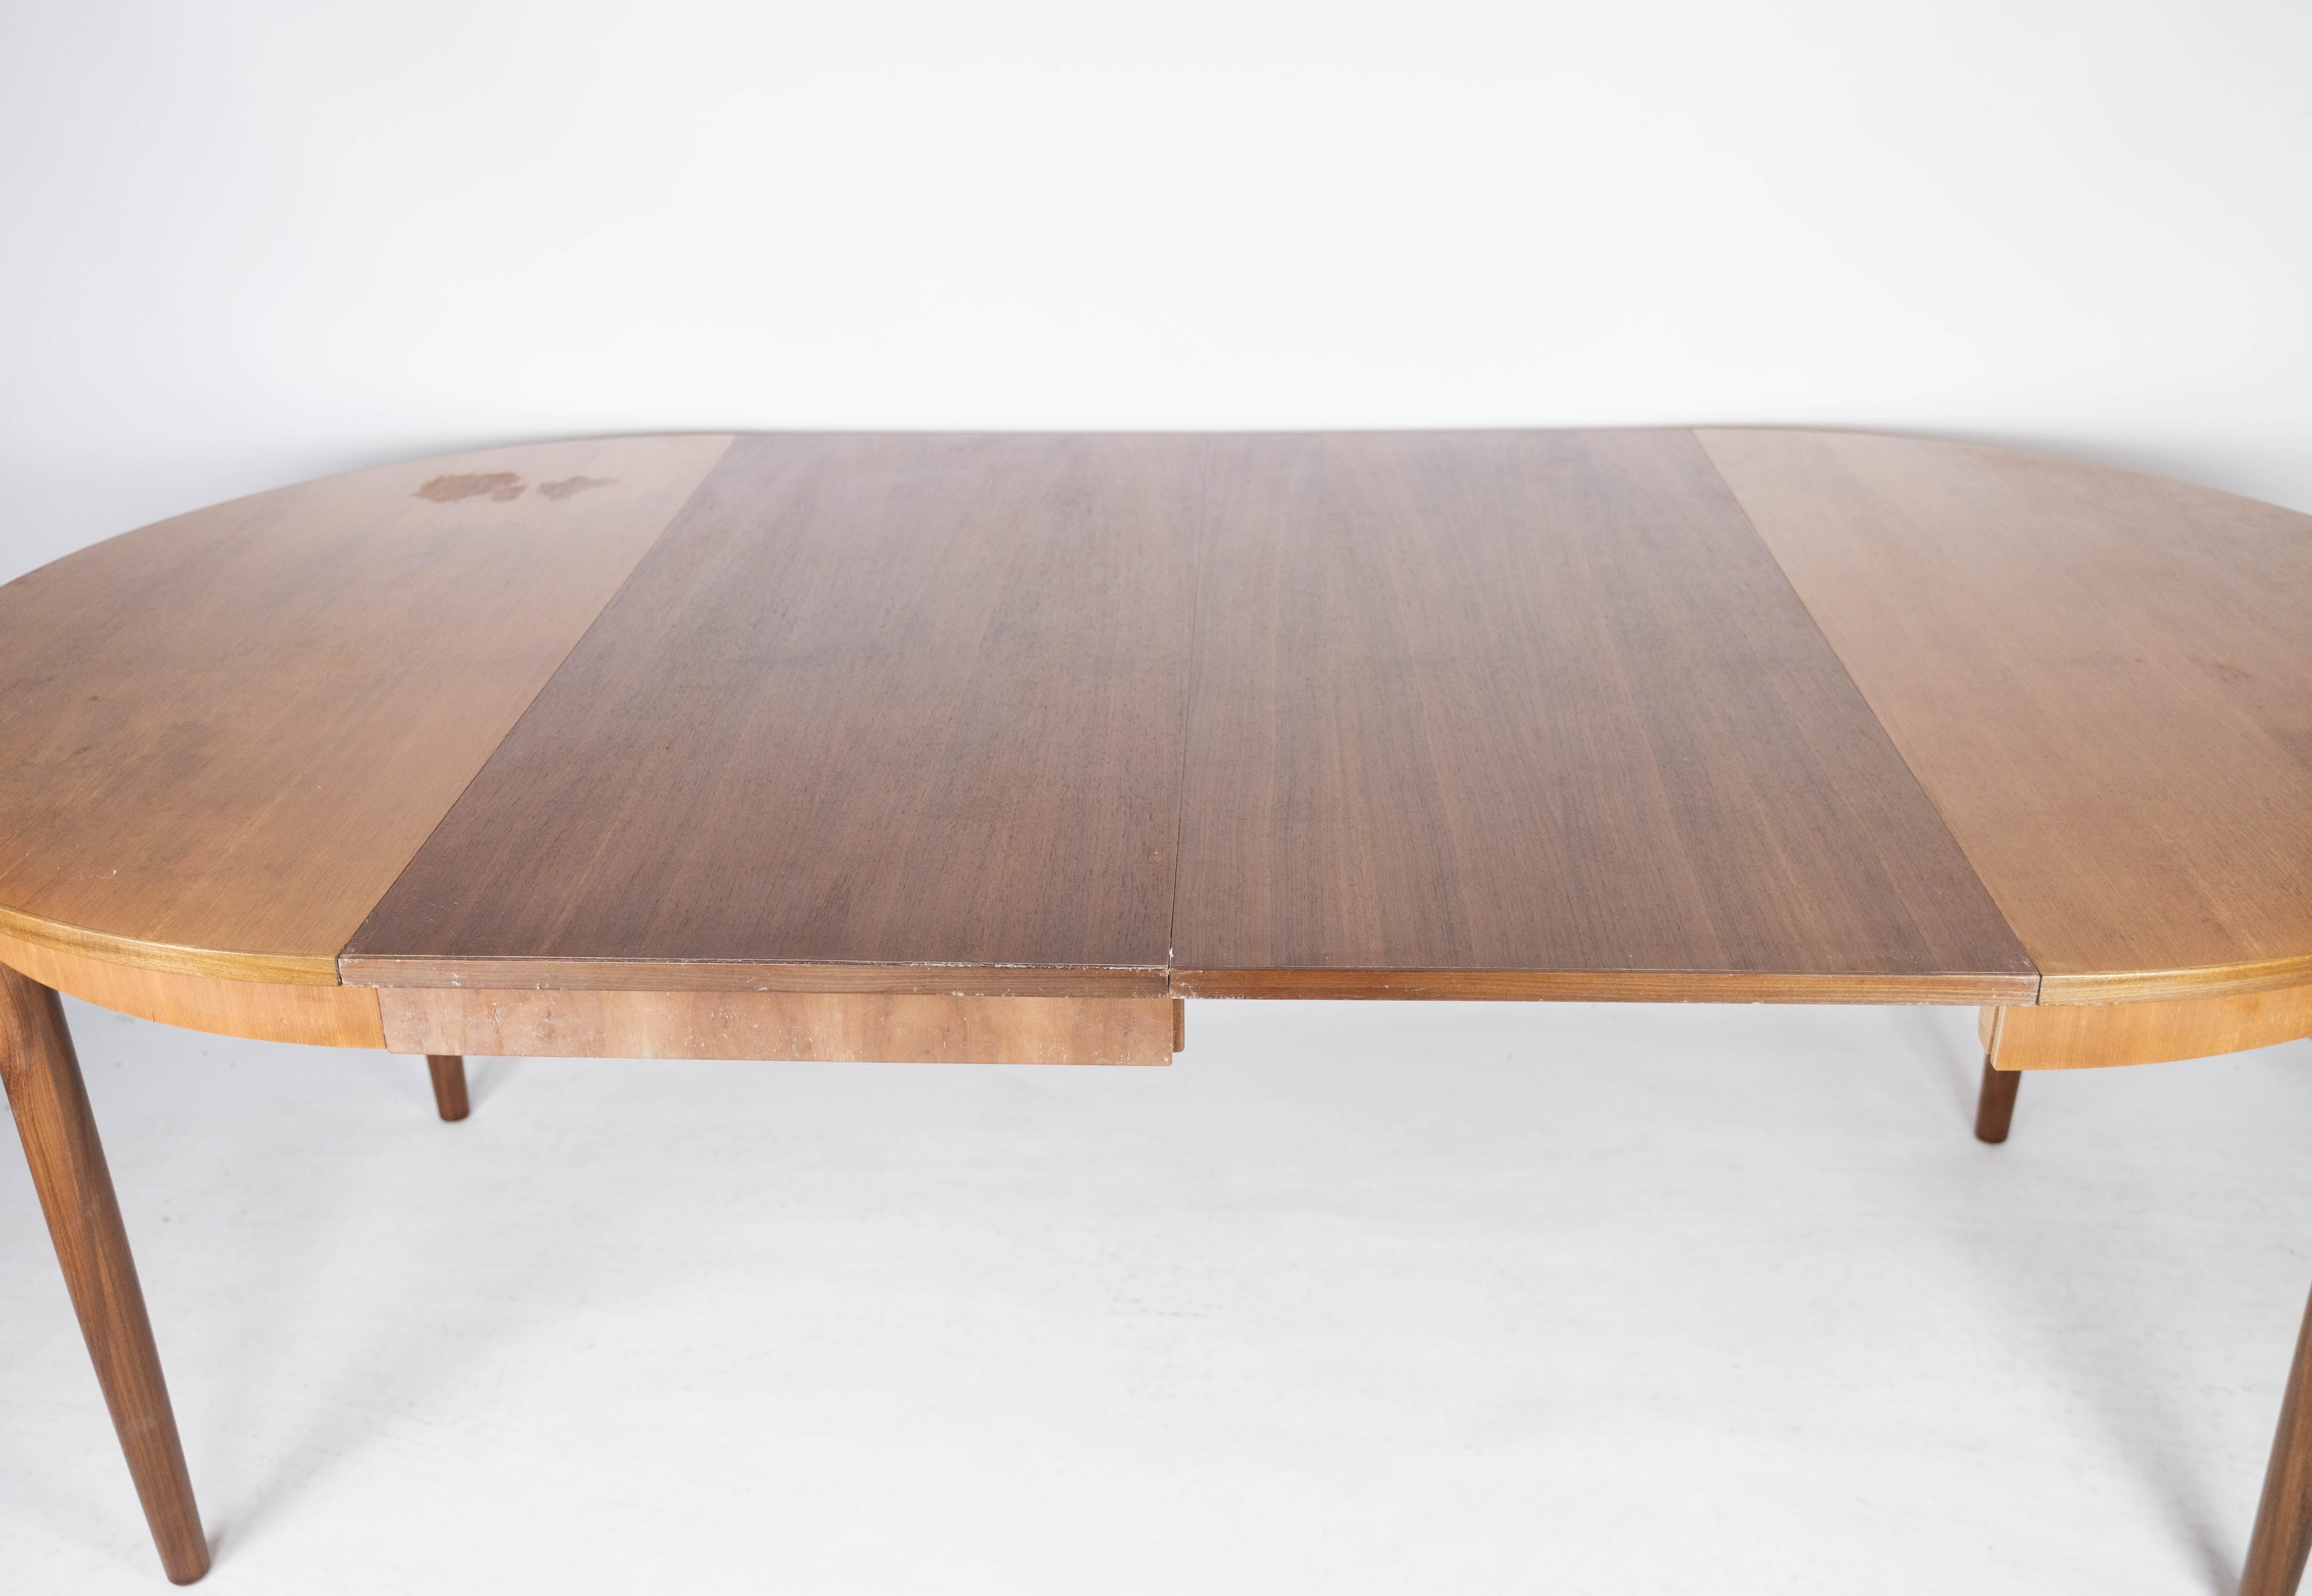 Dining Table Made In Teak With Extensions, Danish Design From 1960s For Sale 11